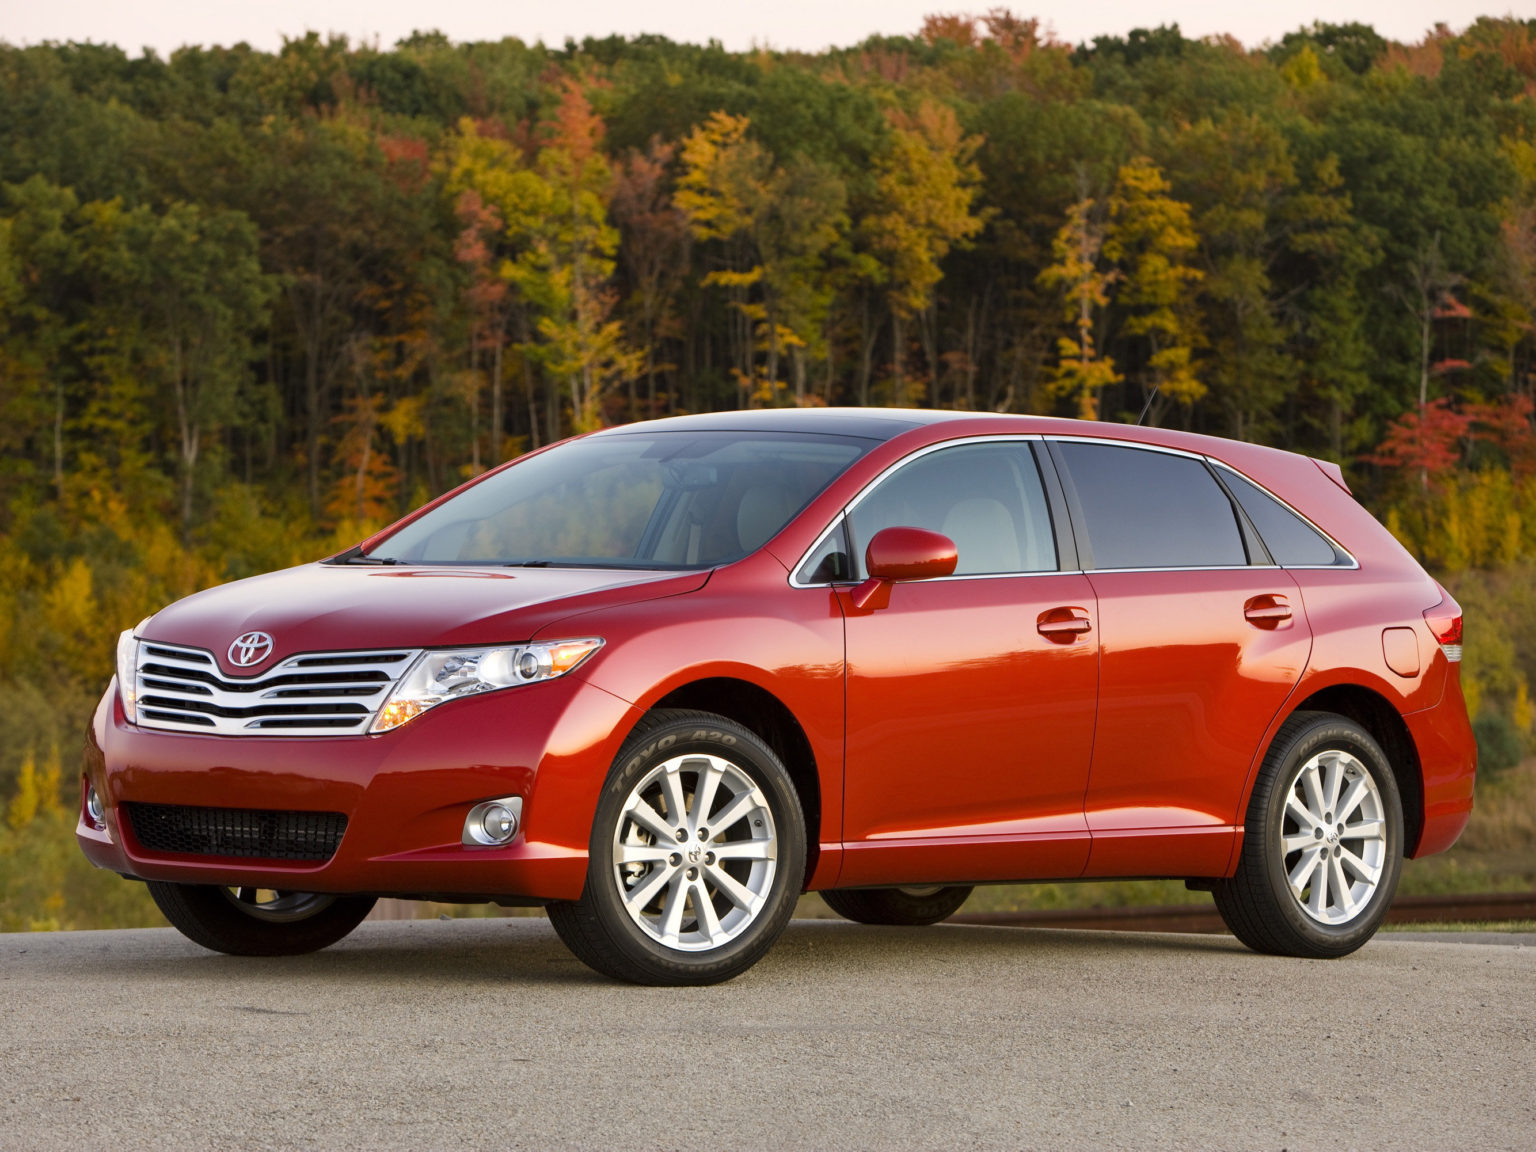 The Toyota Venza crossover was ahead of its time when it debuted in 2009.